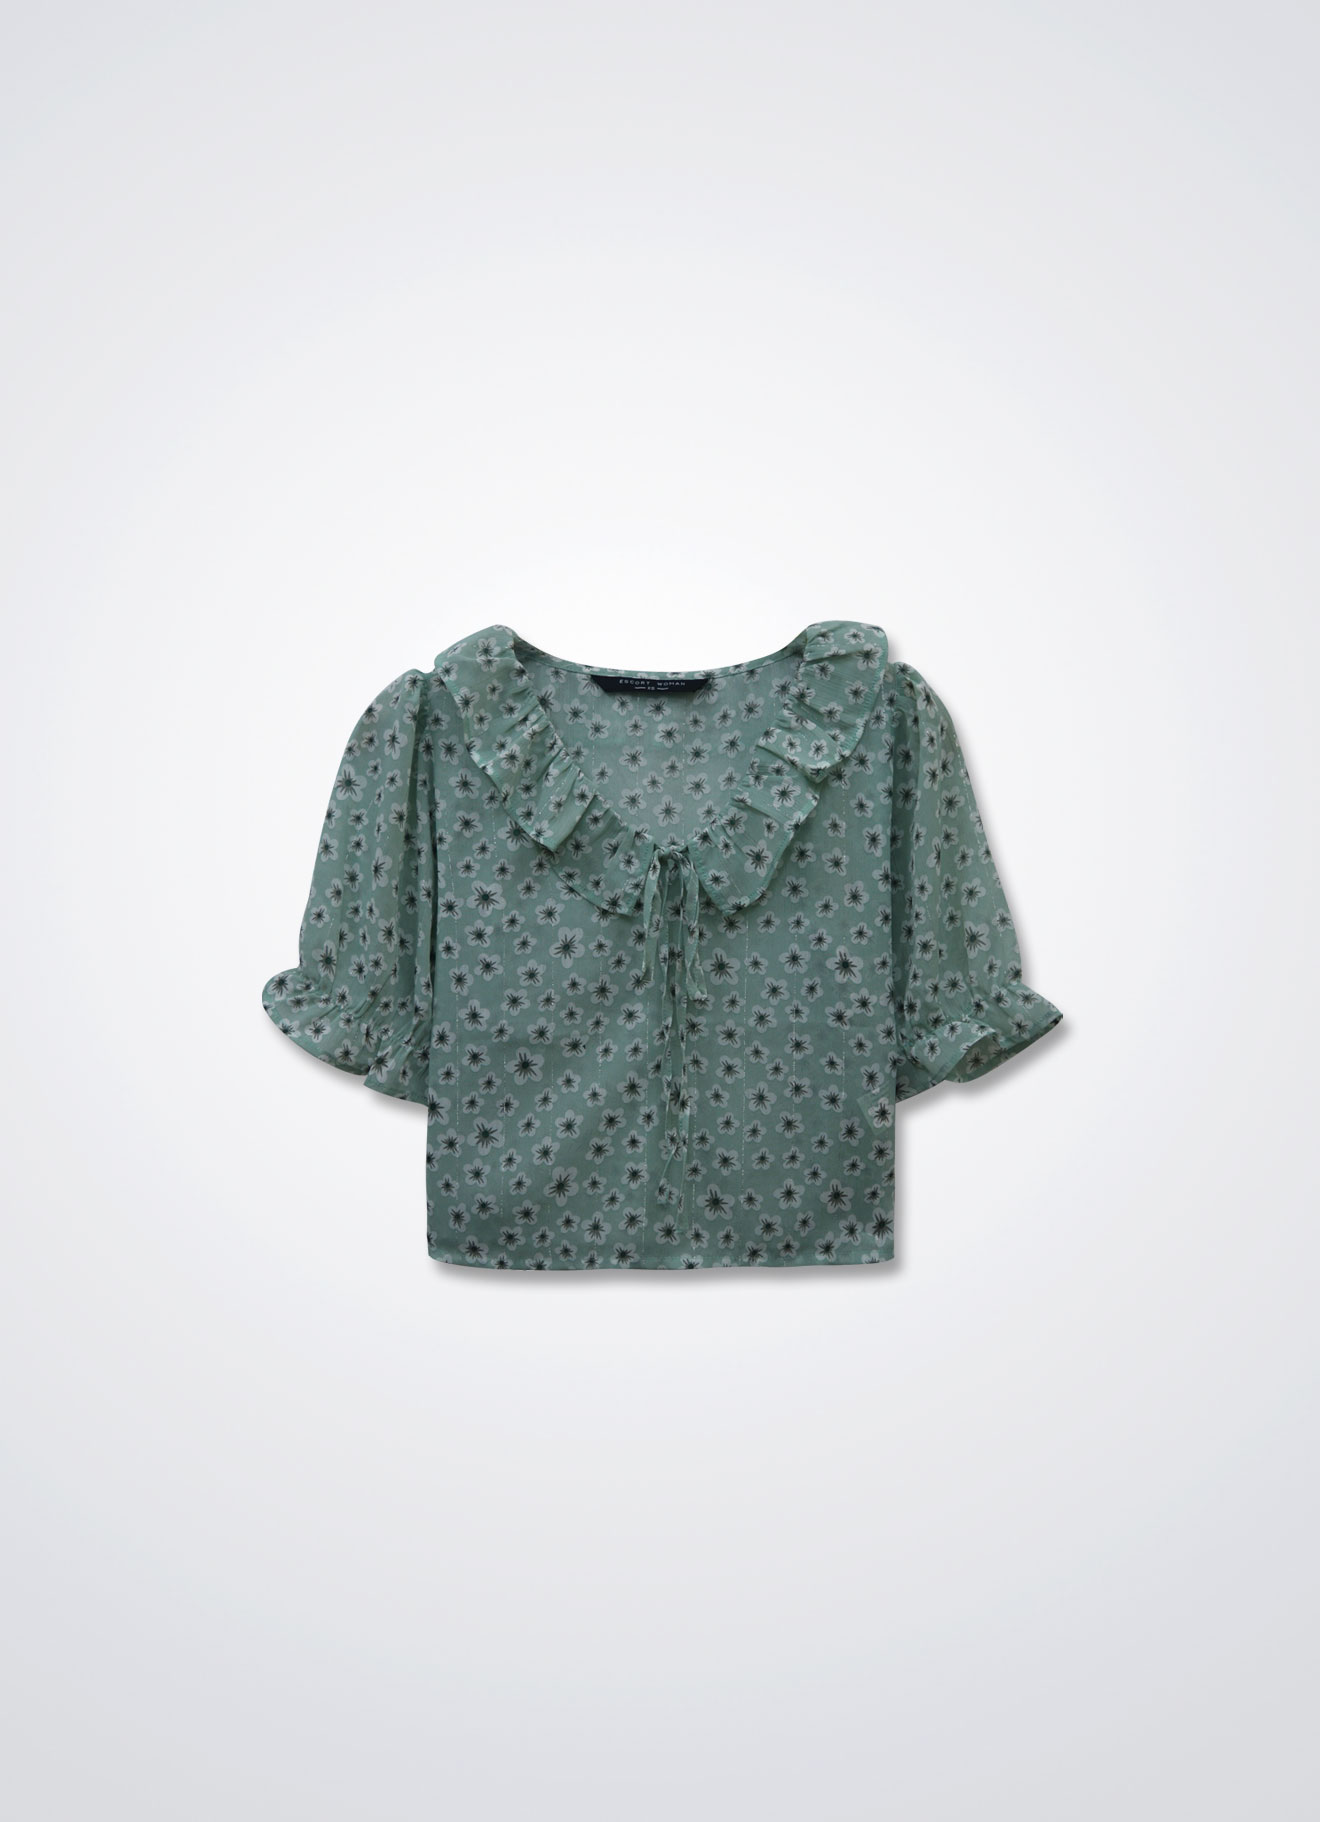 Subtle-Green by Pleated Top